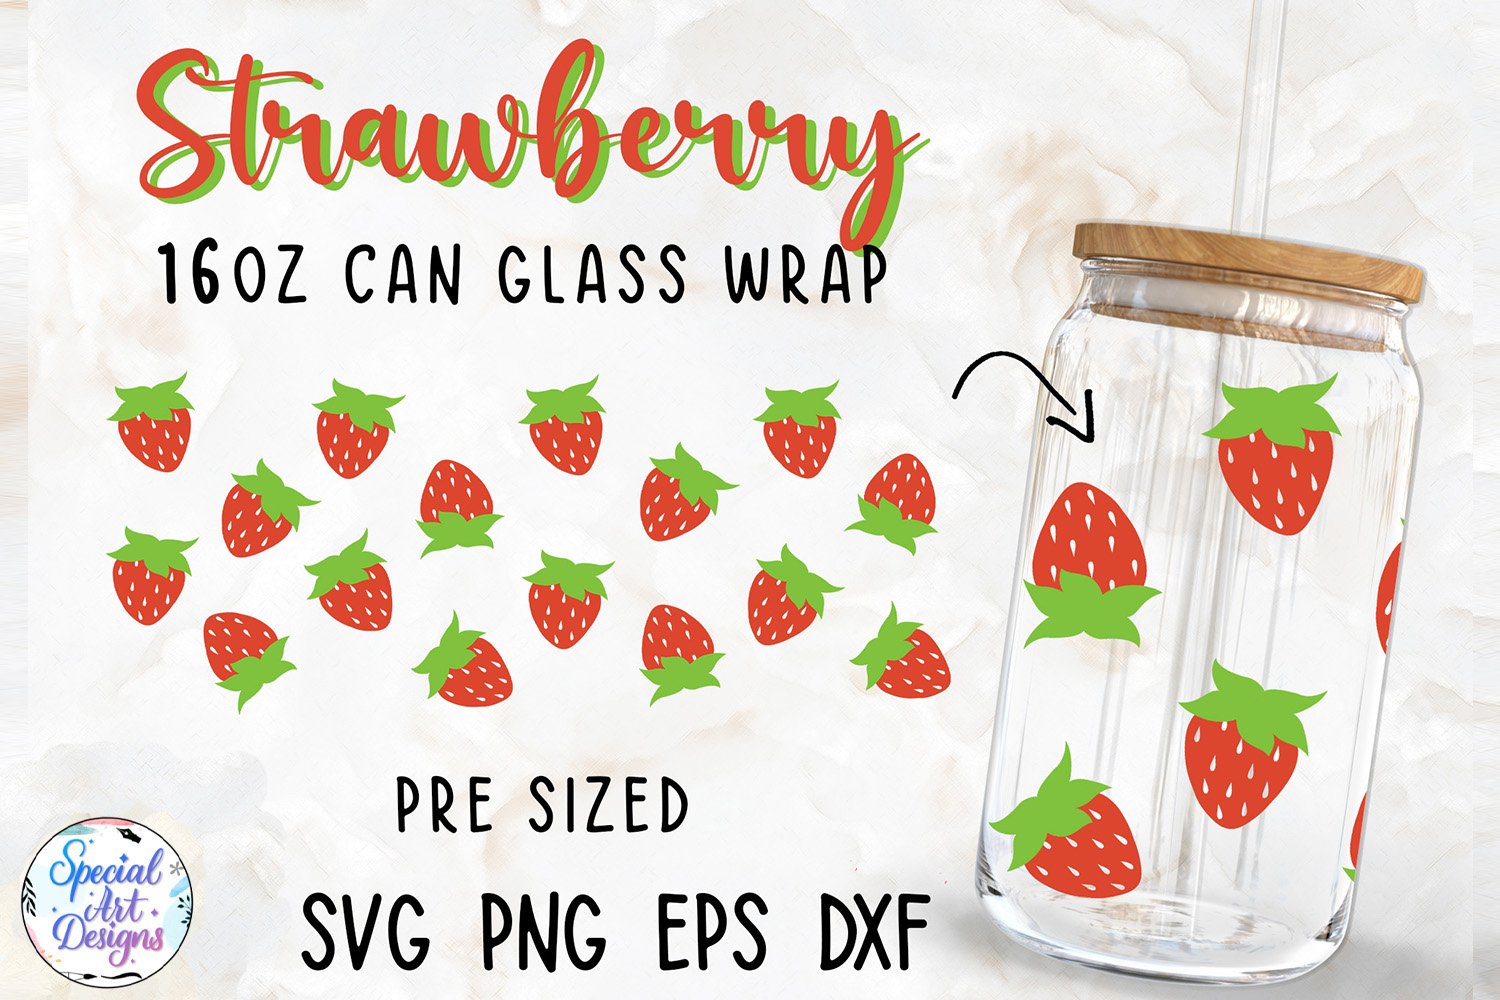 Nice strawberries prints for the glasses.